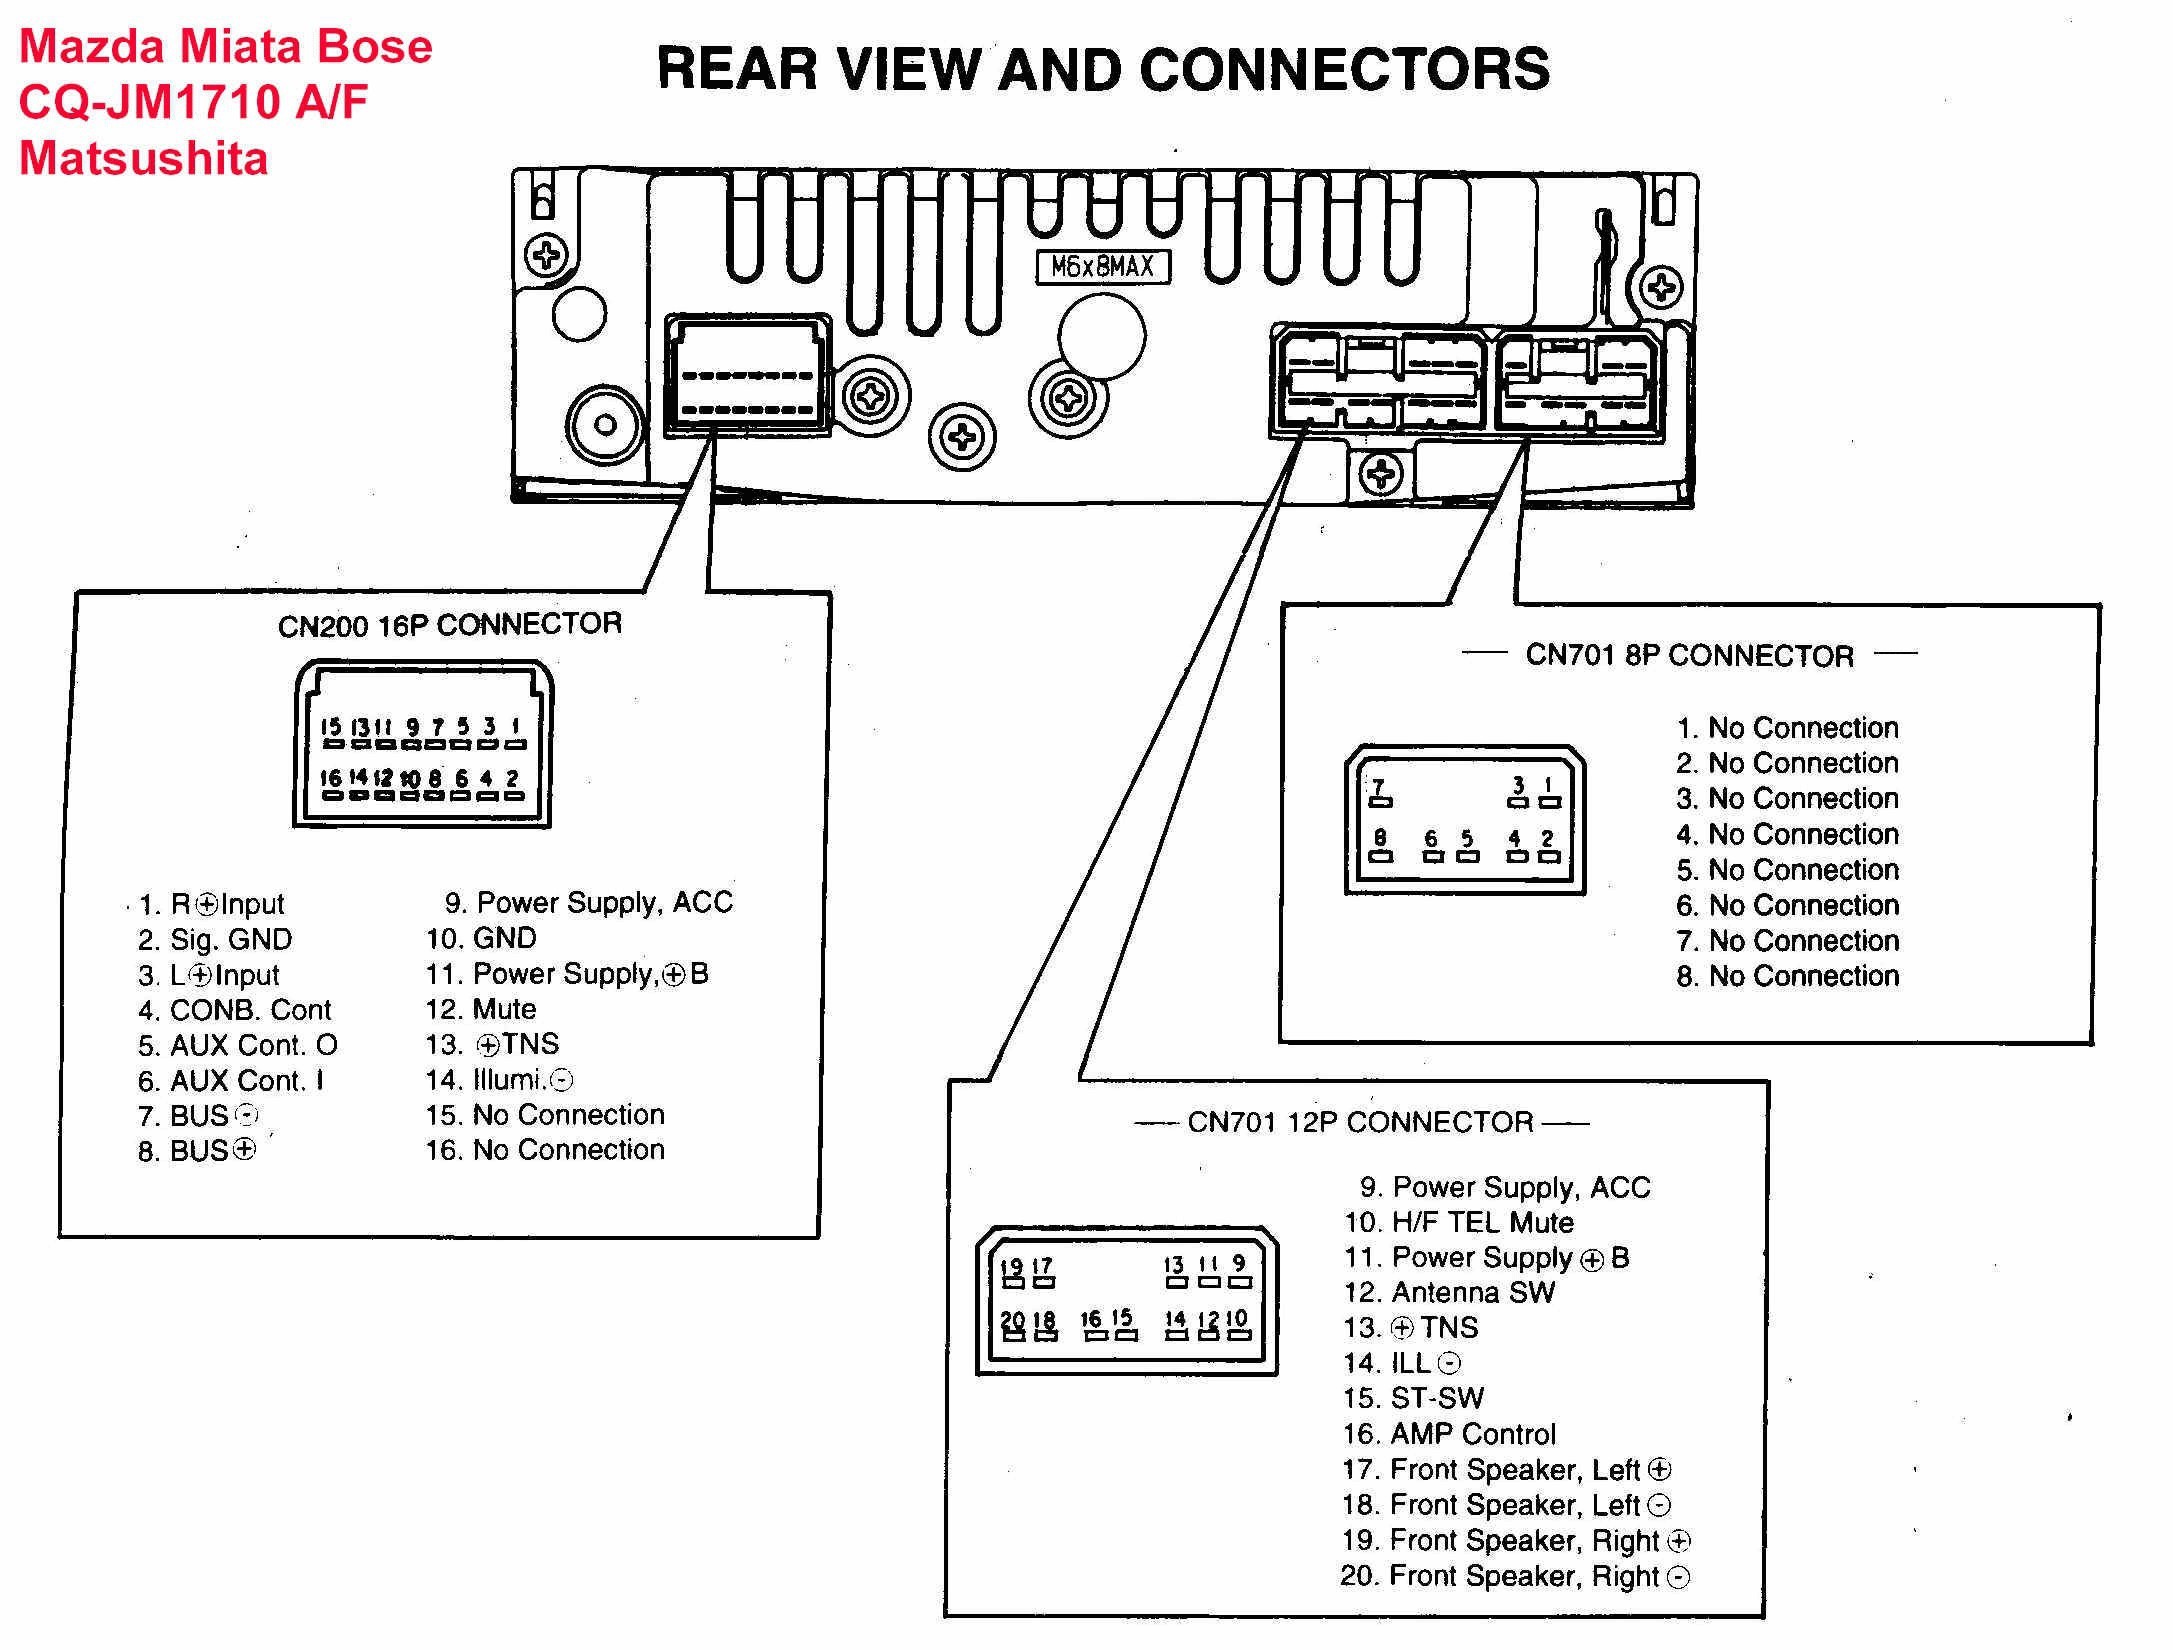 Wiring Diagram for Clarion Car Stereo New Stereo Wiring Diagram Diagram Of Wiring Diagram for Clarion Car Stereo